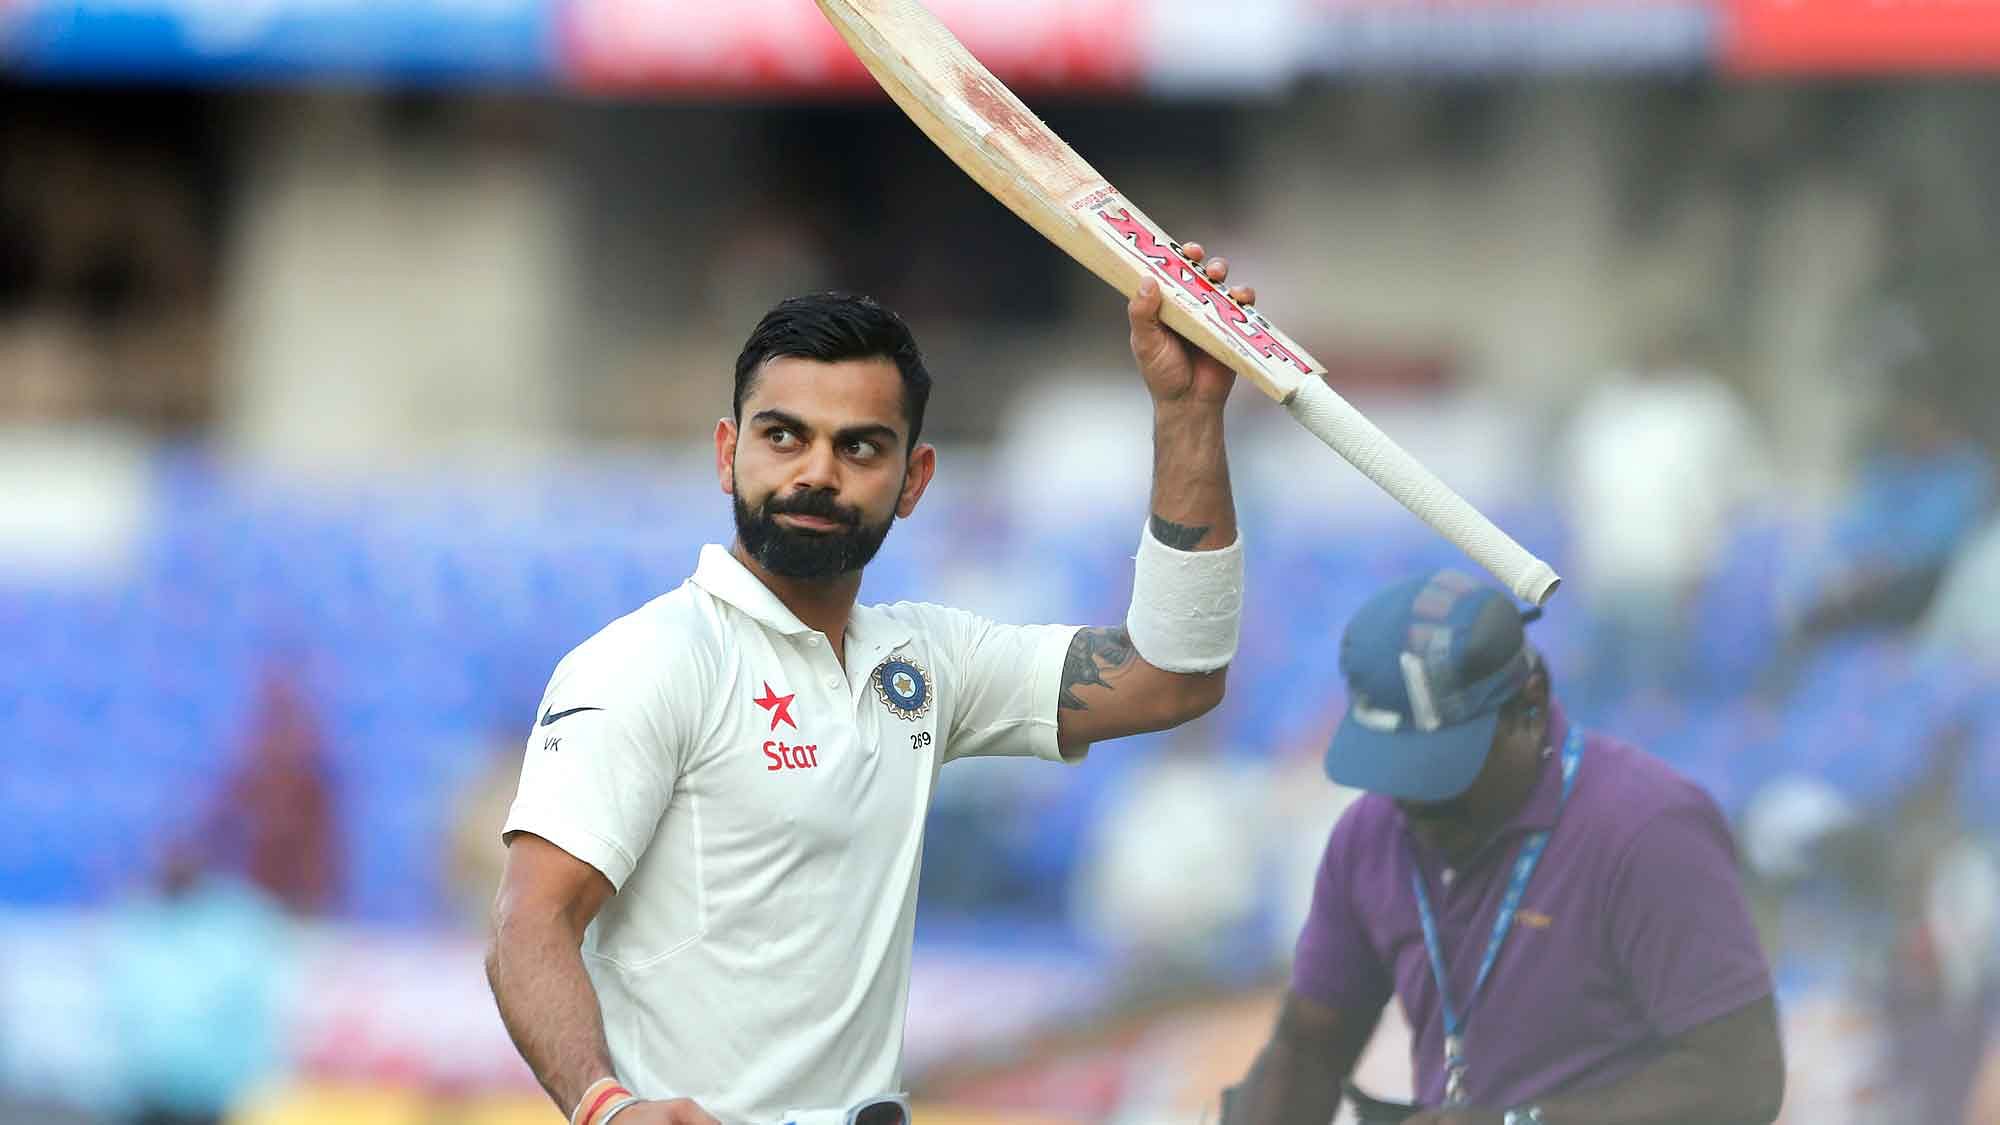 Virat Kohli waves at the crowd after losing his wicket for 204 on Day 2 of the Hyderabad Test. (Photo: BCCI)